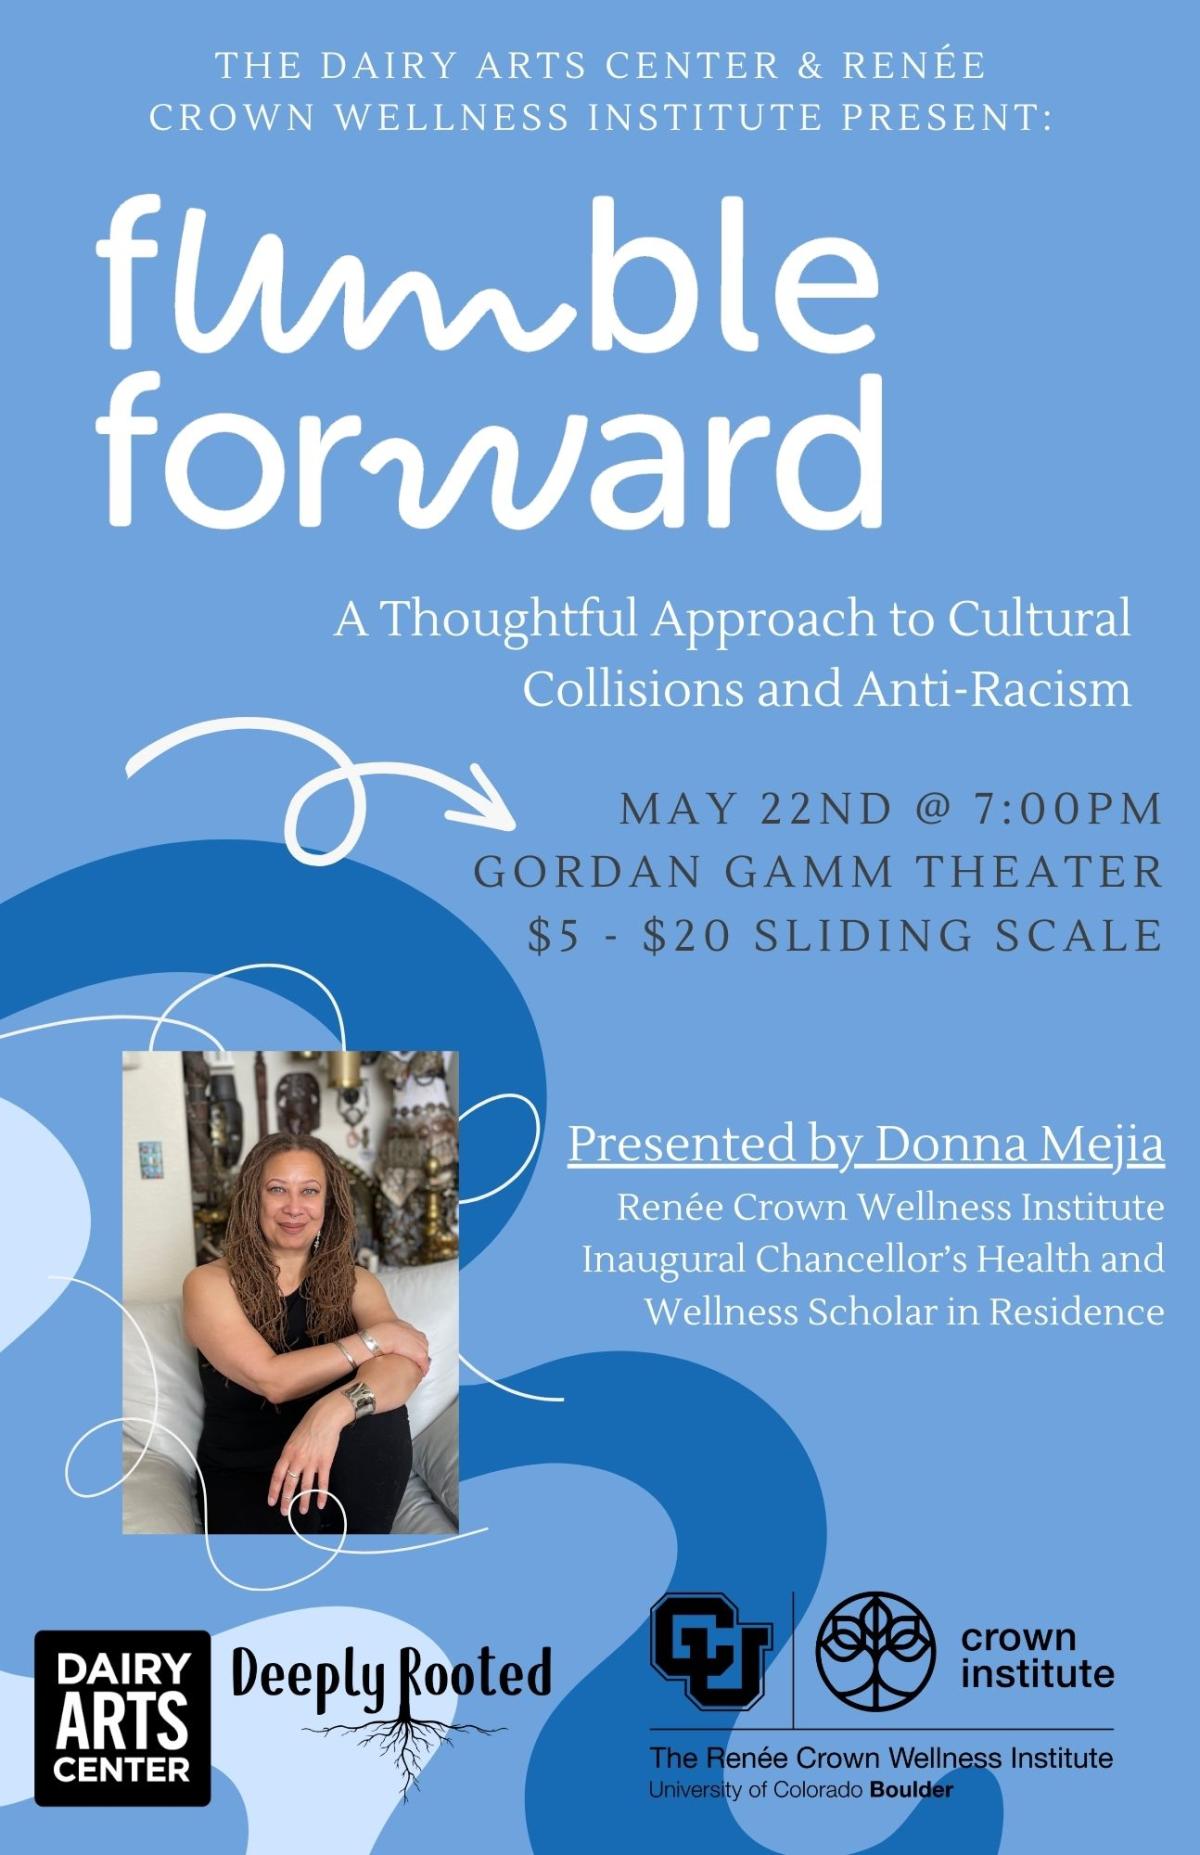 Fumble Forward: A Thoughtful Approach to Cultural Collisions and Anti-Racism